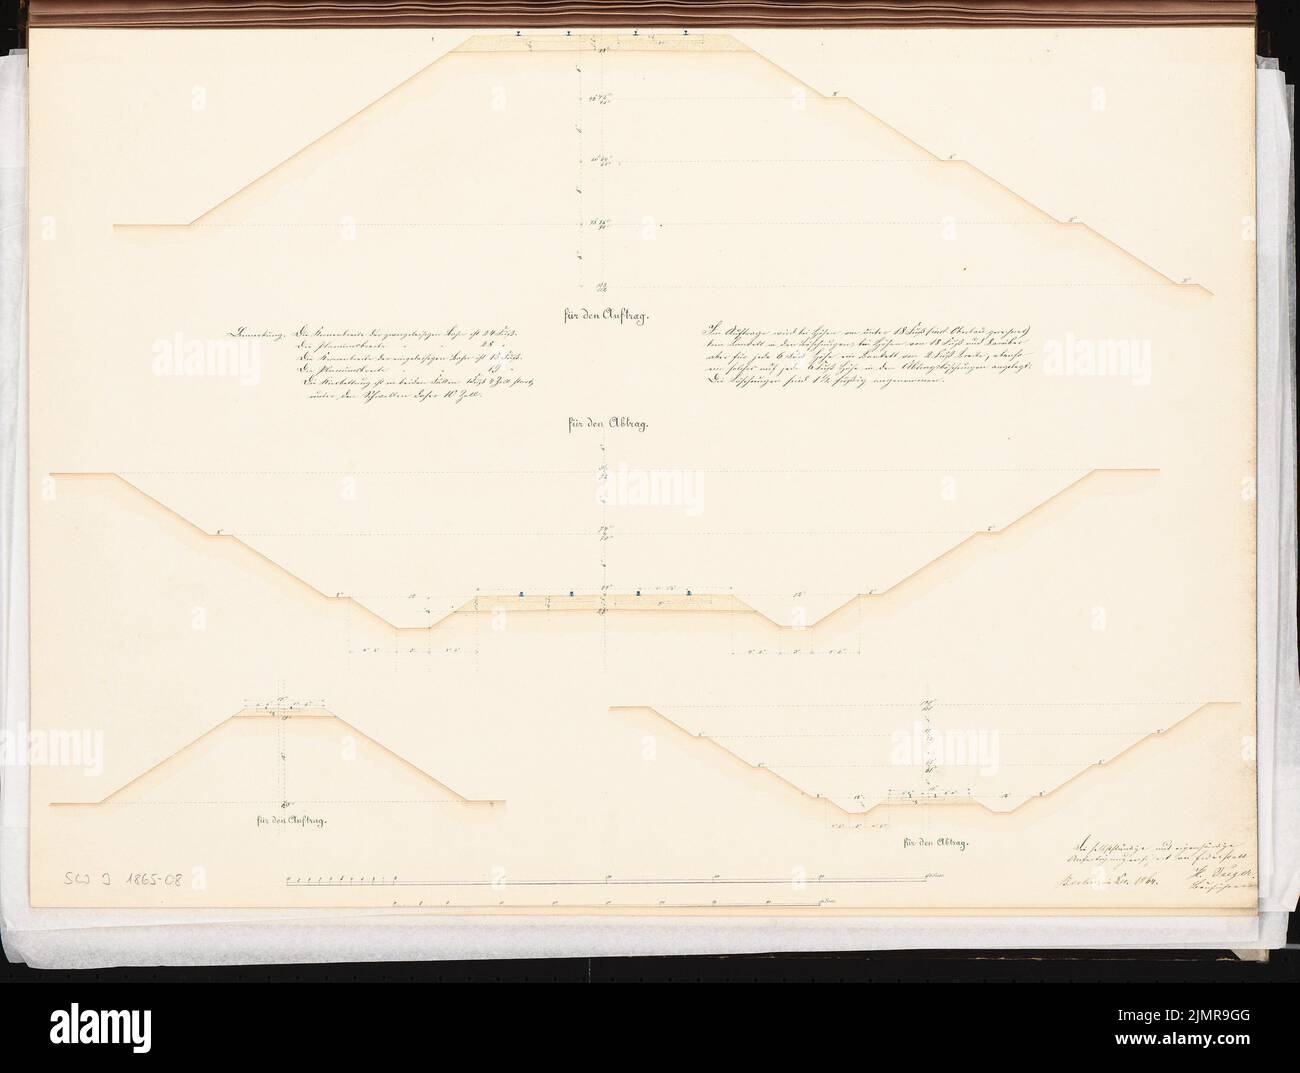 Taeger Hermann (1837-1918), connecting railway for Berlin. Schinkel competition 1865 (1865): 4 terrain profiles for filling and excavation; 2 scale strips; Explanation text. Tusche watercolor on the box, 48 x 63.5 cm (including scan edges) Taeger Hermann  (1837-1918): Verbindungsbahn für Berlin. Schinkelwettbewerb 1865 Stock Photo